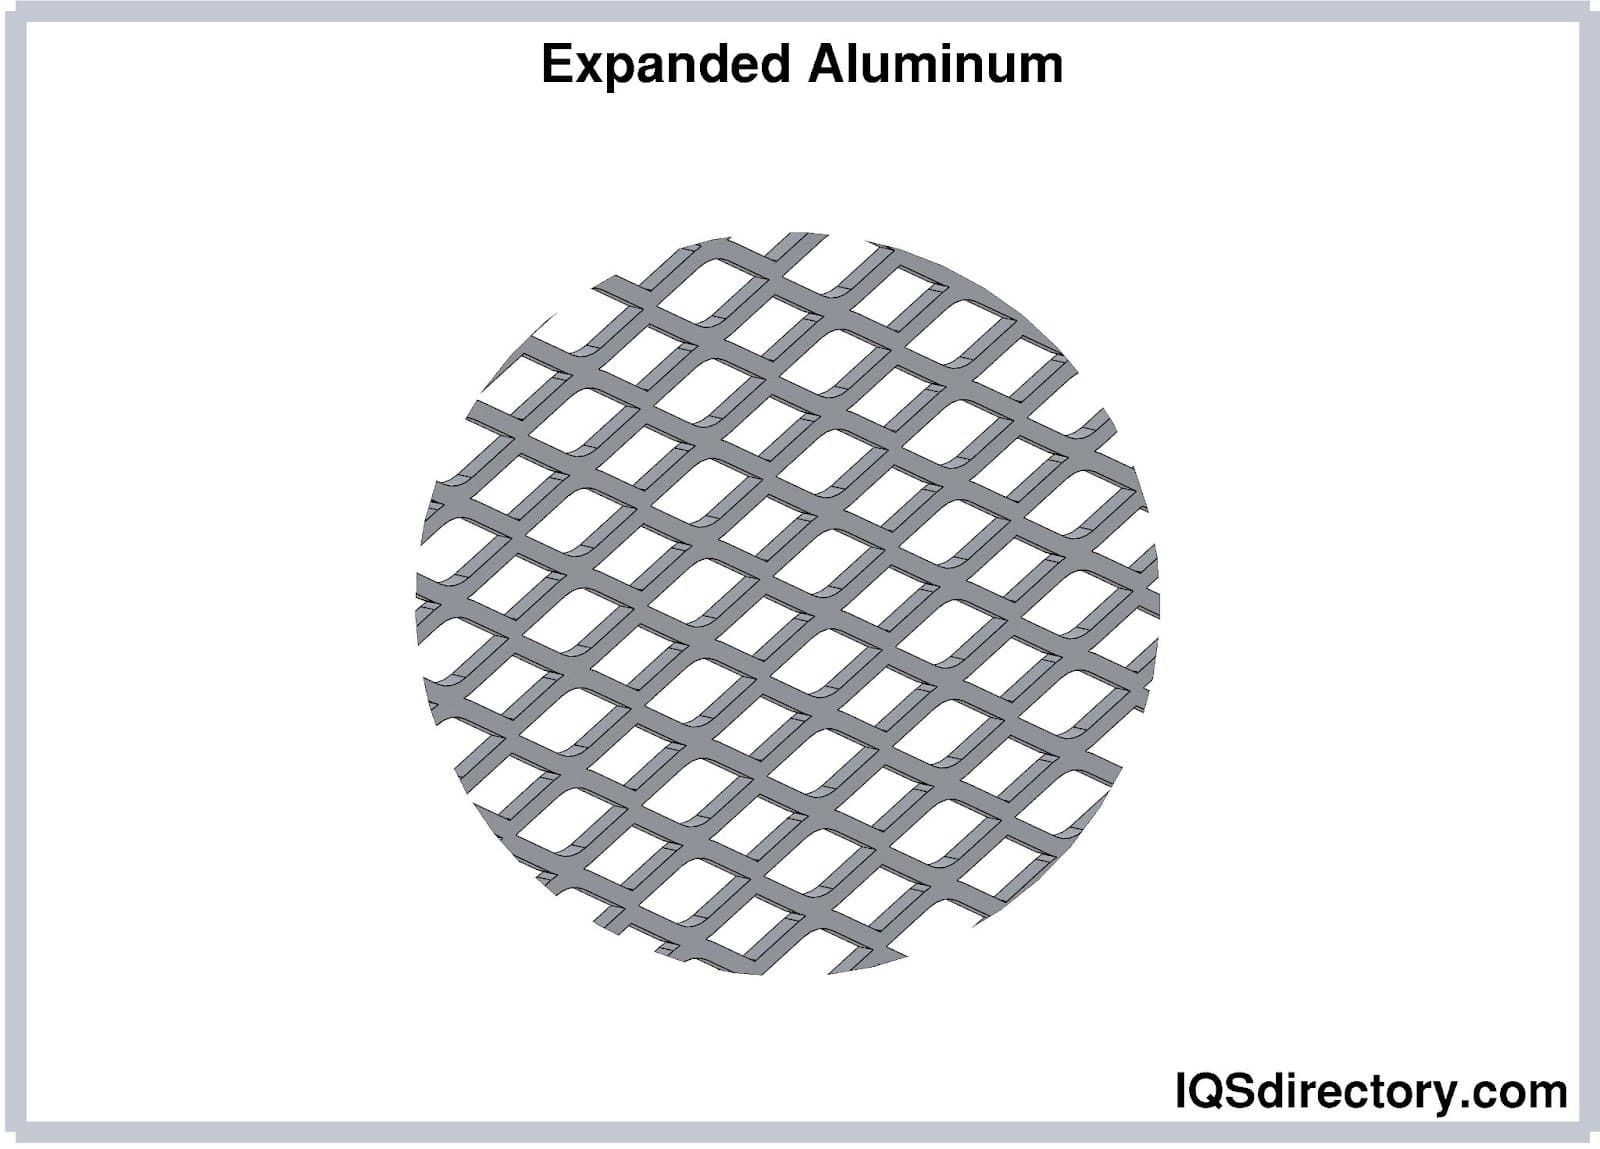 Expanded Aluminum